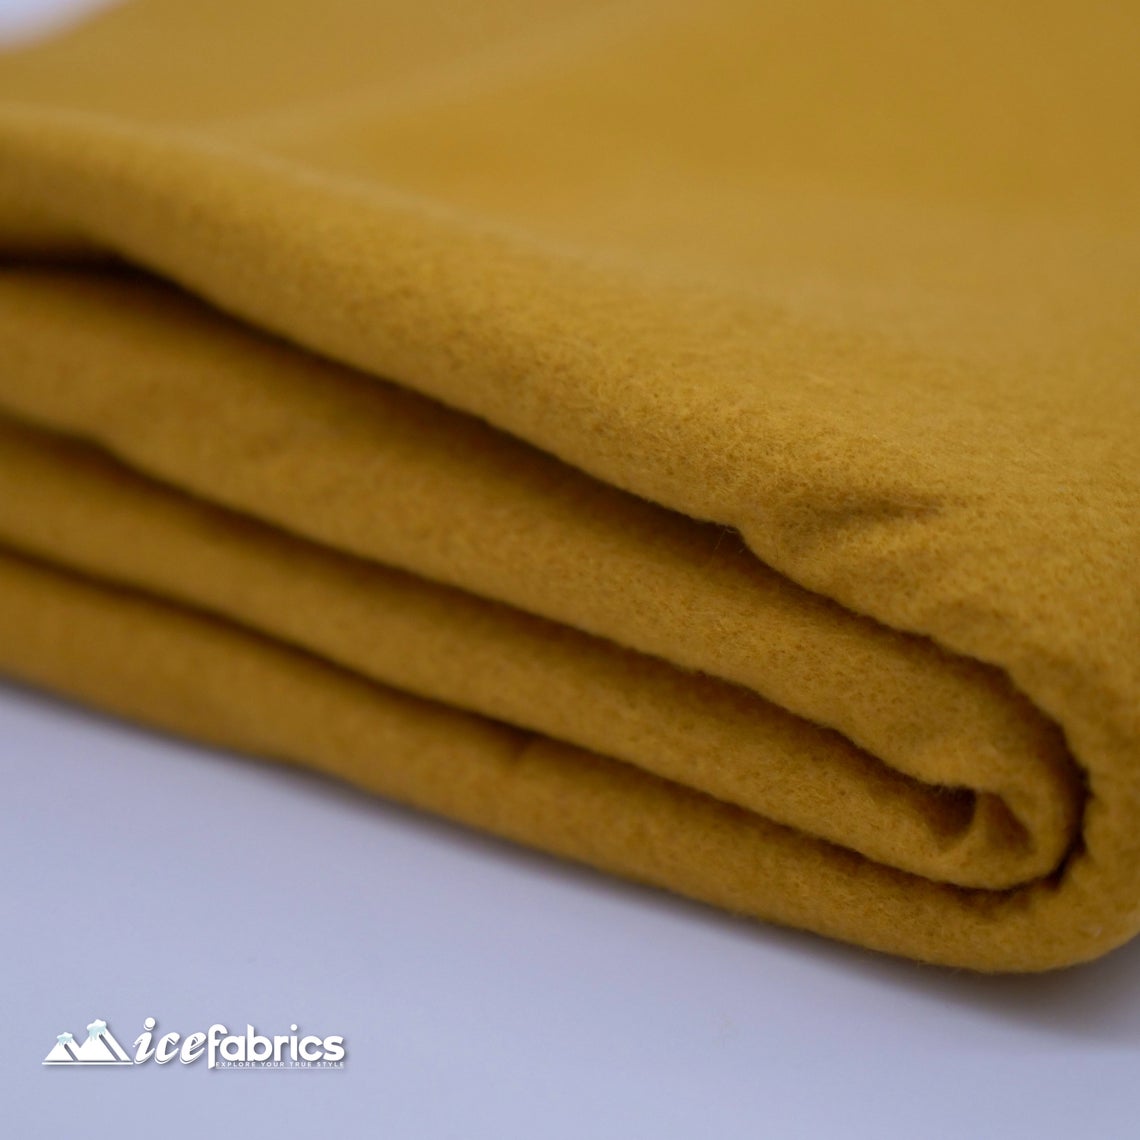 72" Wide 1.6 mm Thick Acrylic Gold Felt Fabric By The YardICE FABRICSICE FABRICSPer Yard1.6mm Thick72" Wide 1.6 mm Thick Acrylic Gold Felt Fabric By The Yard ICE FABRICS